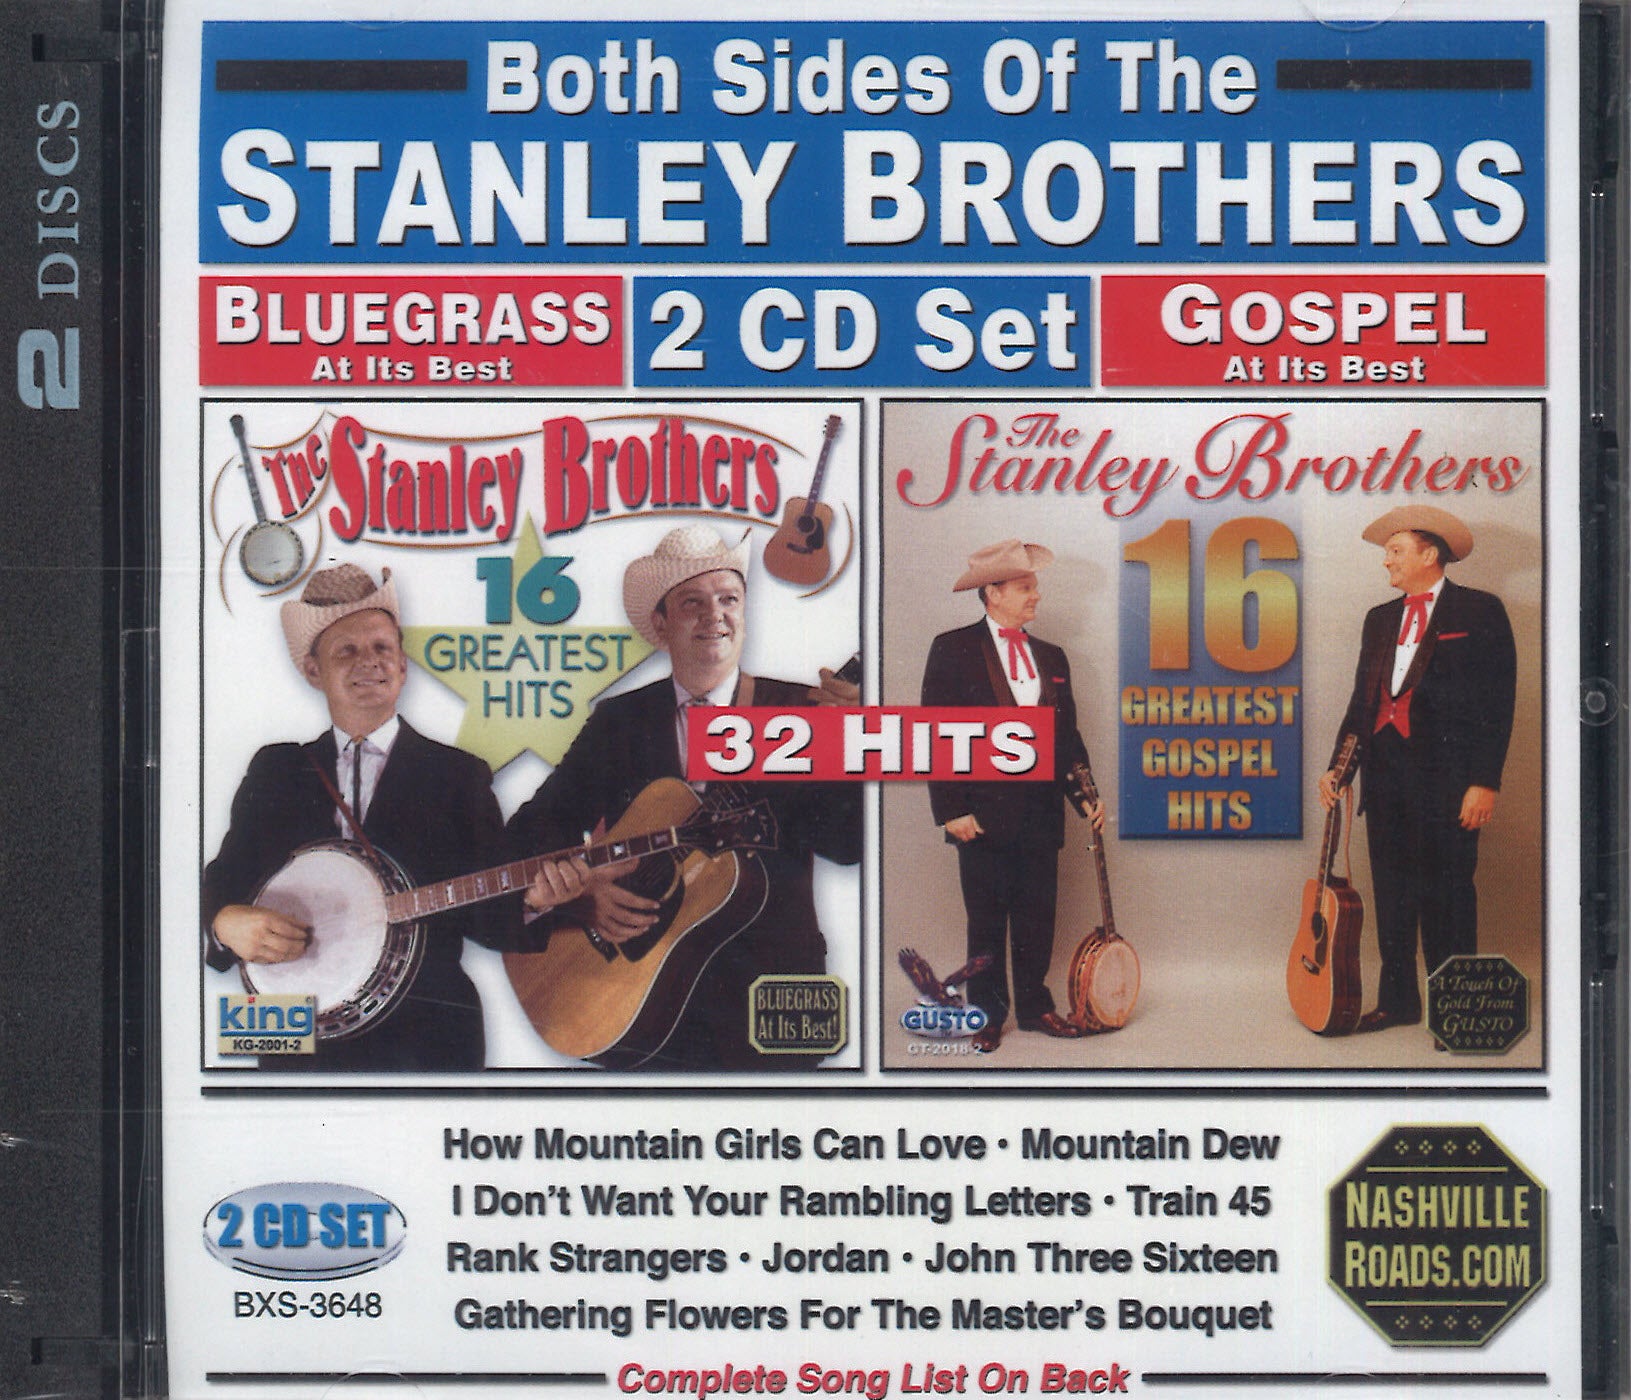 Both Sides Of The Stanley Brothers: 2 CD Set